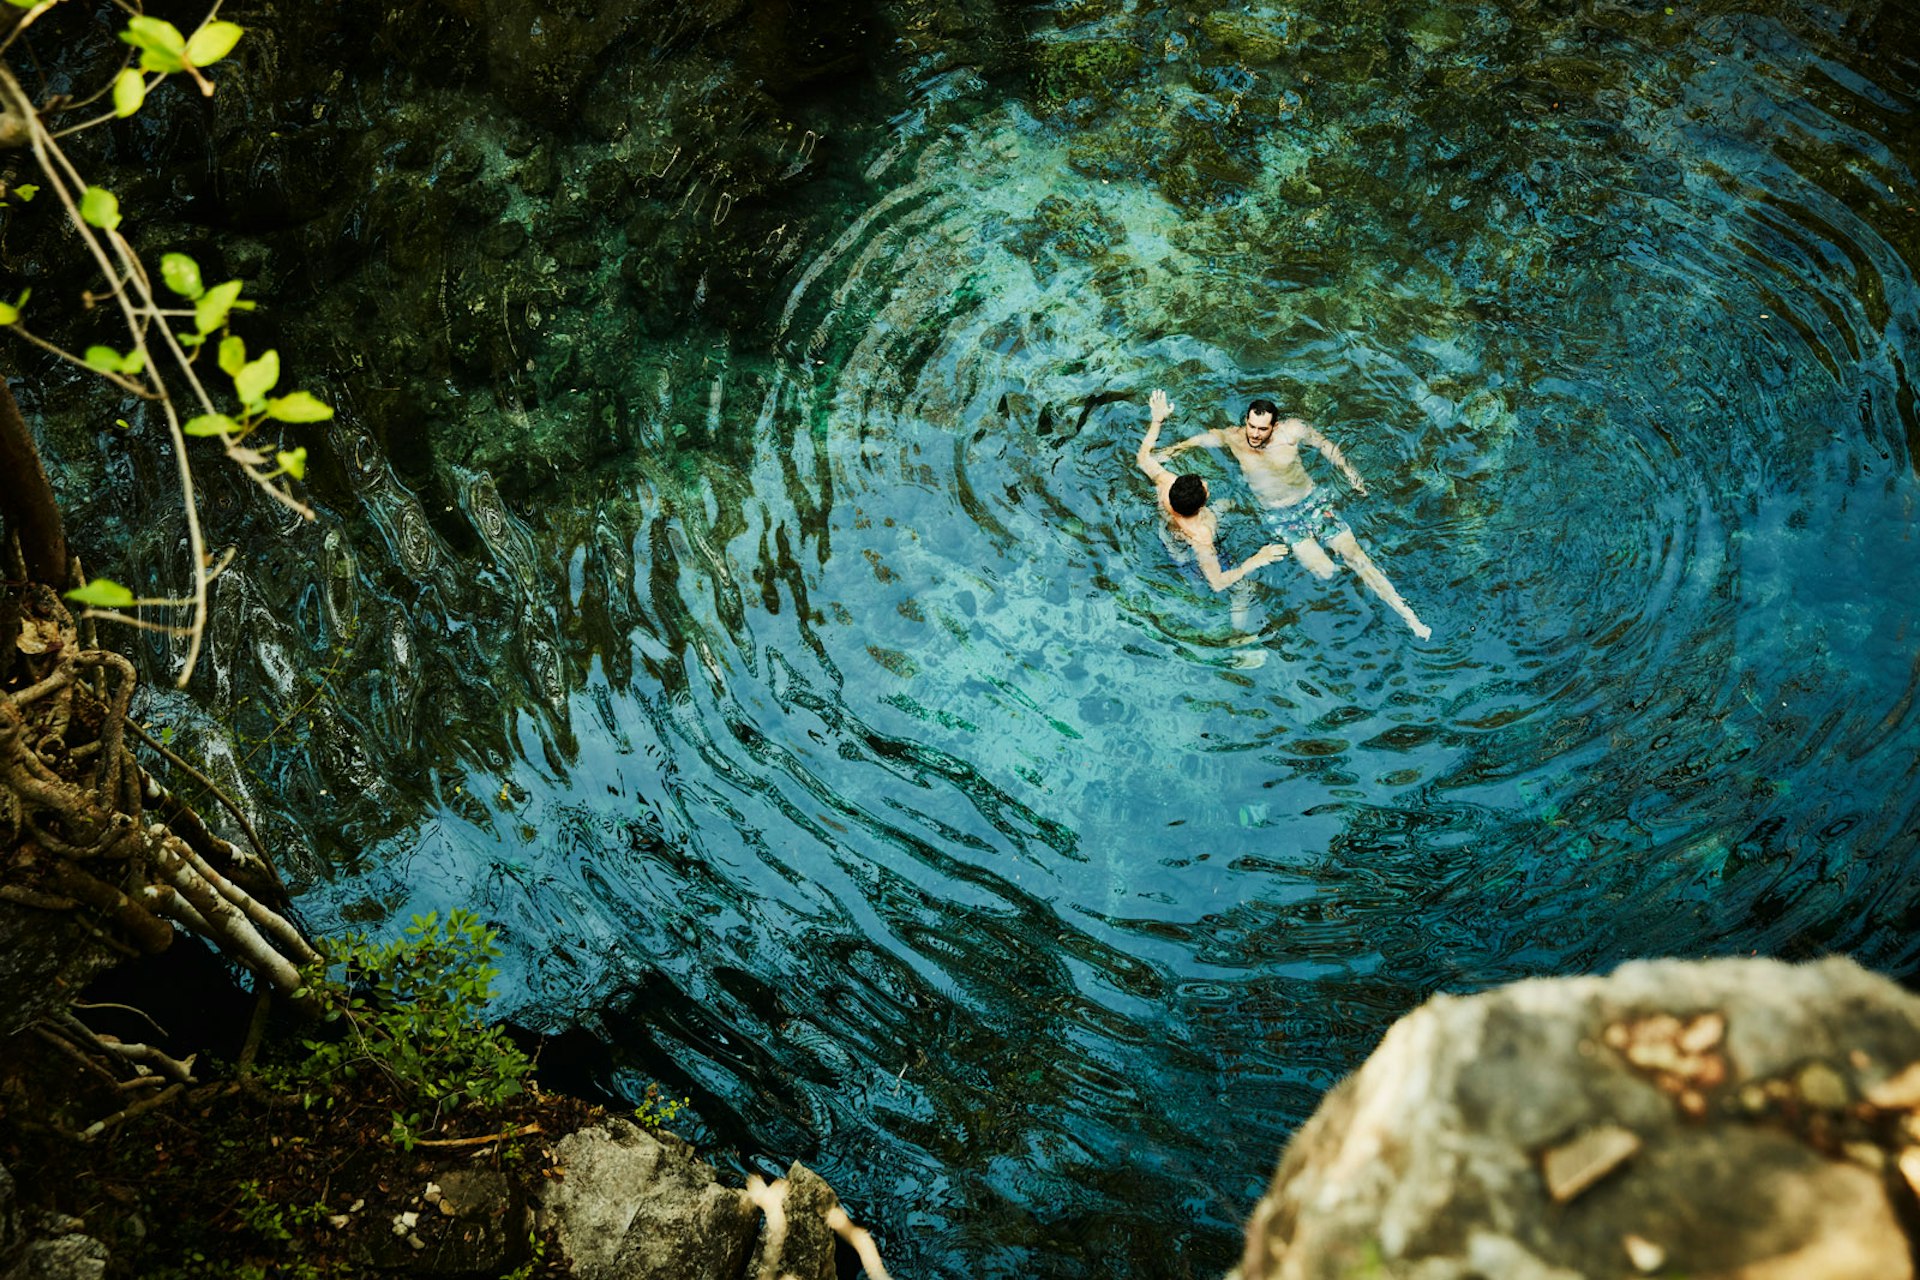 Two men talk and swim in a clear lake with jungle plants and rocks surrounding them